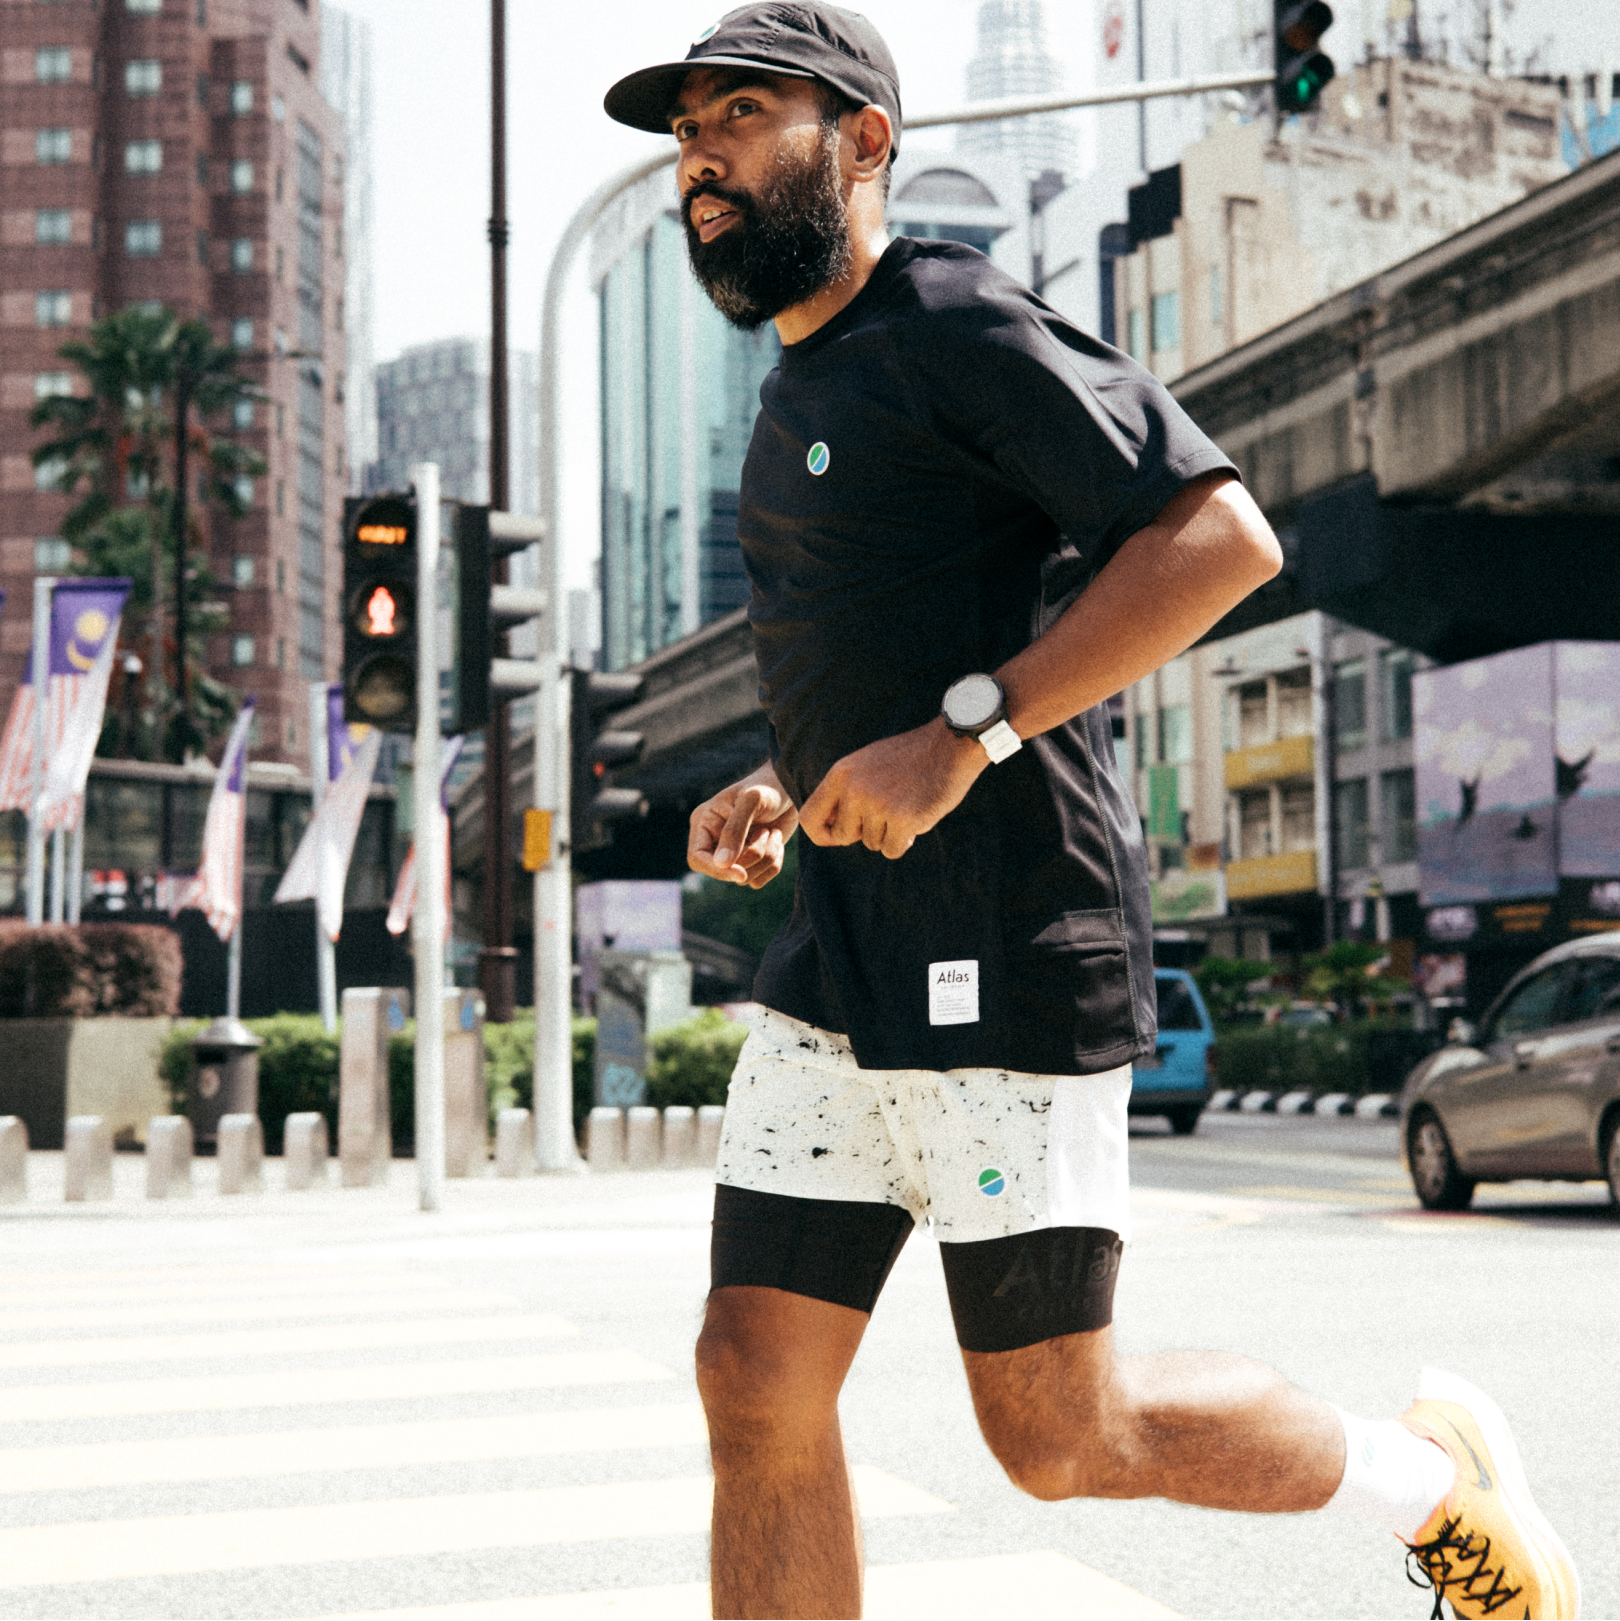 Acid Running 2-in-1 Shorts in Black - Sustainable Materials